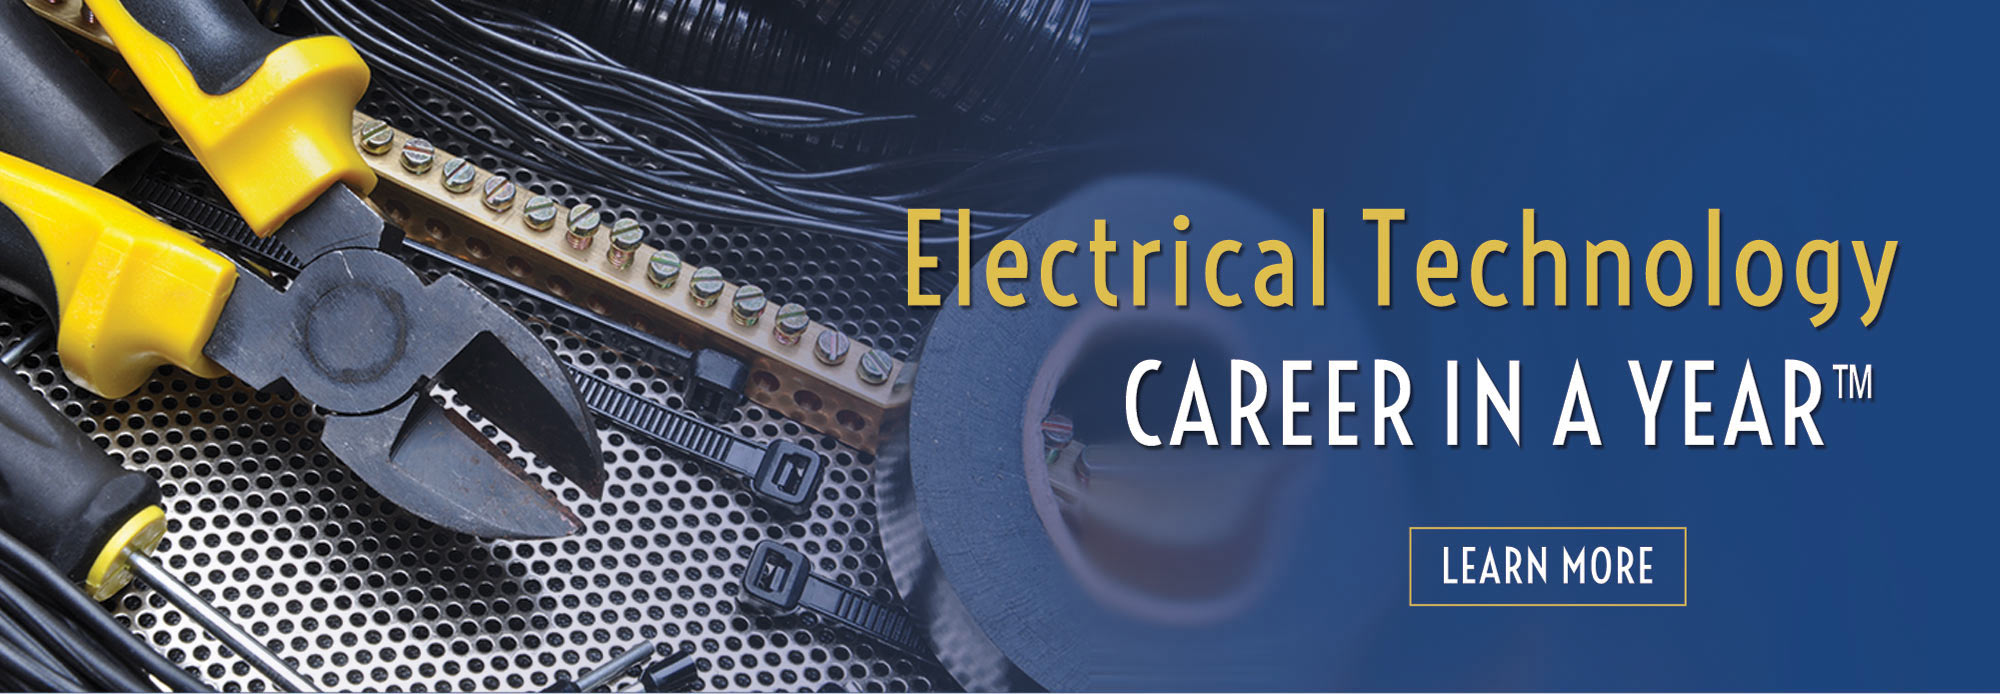 Electrical Technology Career in a Year